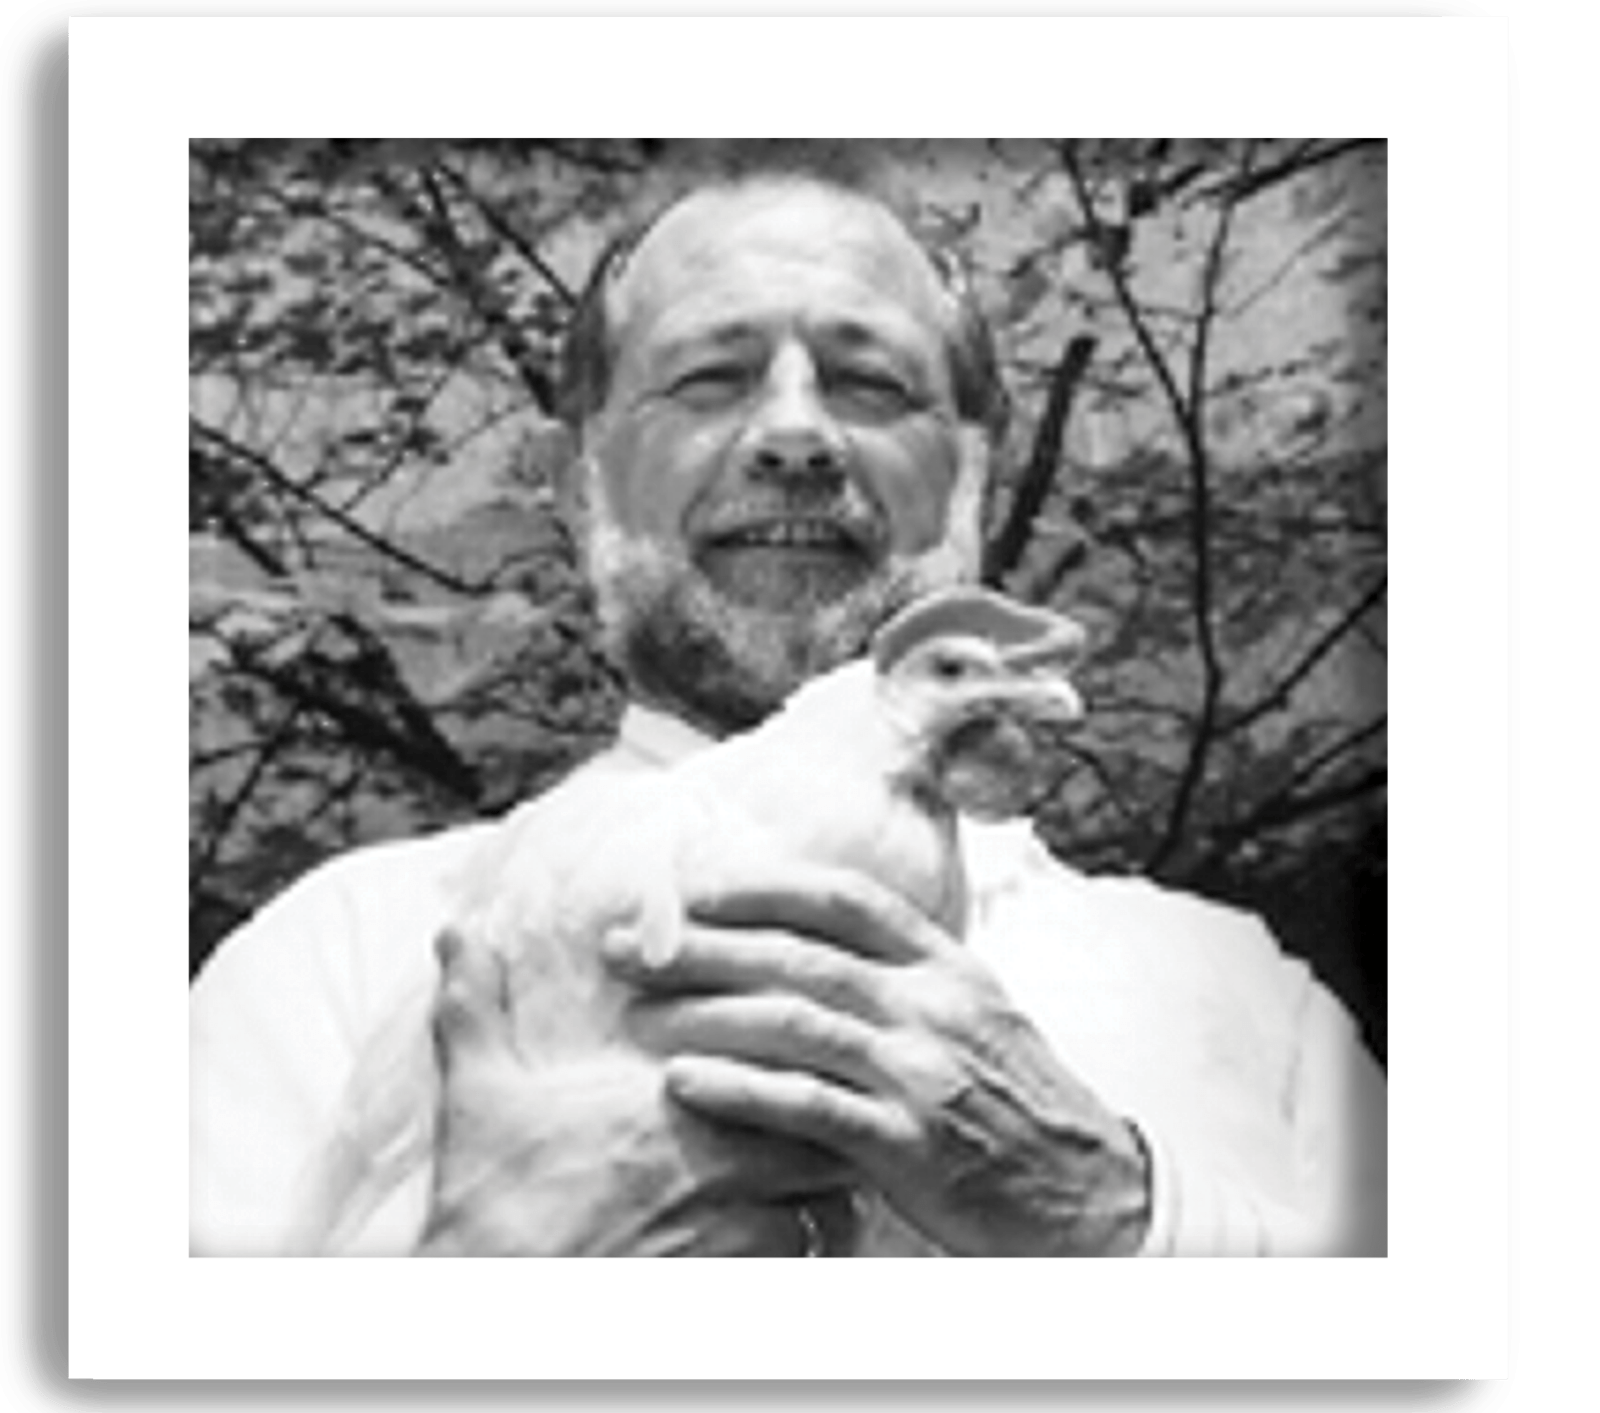 Professor Ian Duncan, pictured in this black and white photo with a chicken, was CCSAW’s first ever Director in the early 90s. Dr. Duncan was one of the first people to develop a scientific approach to ask animals what they want.